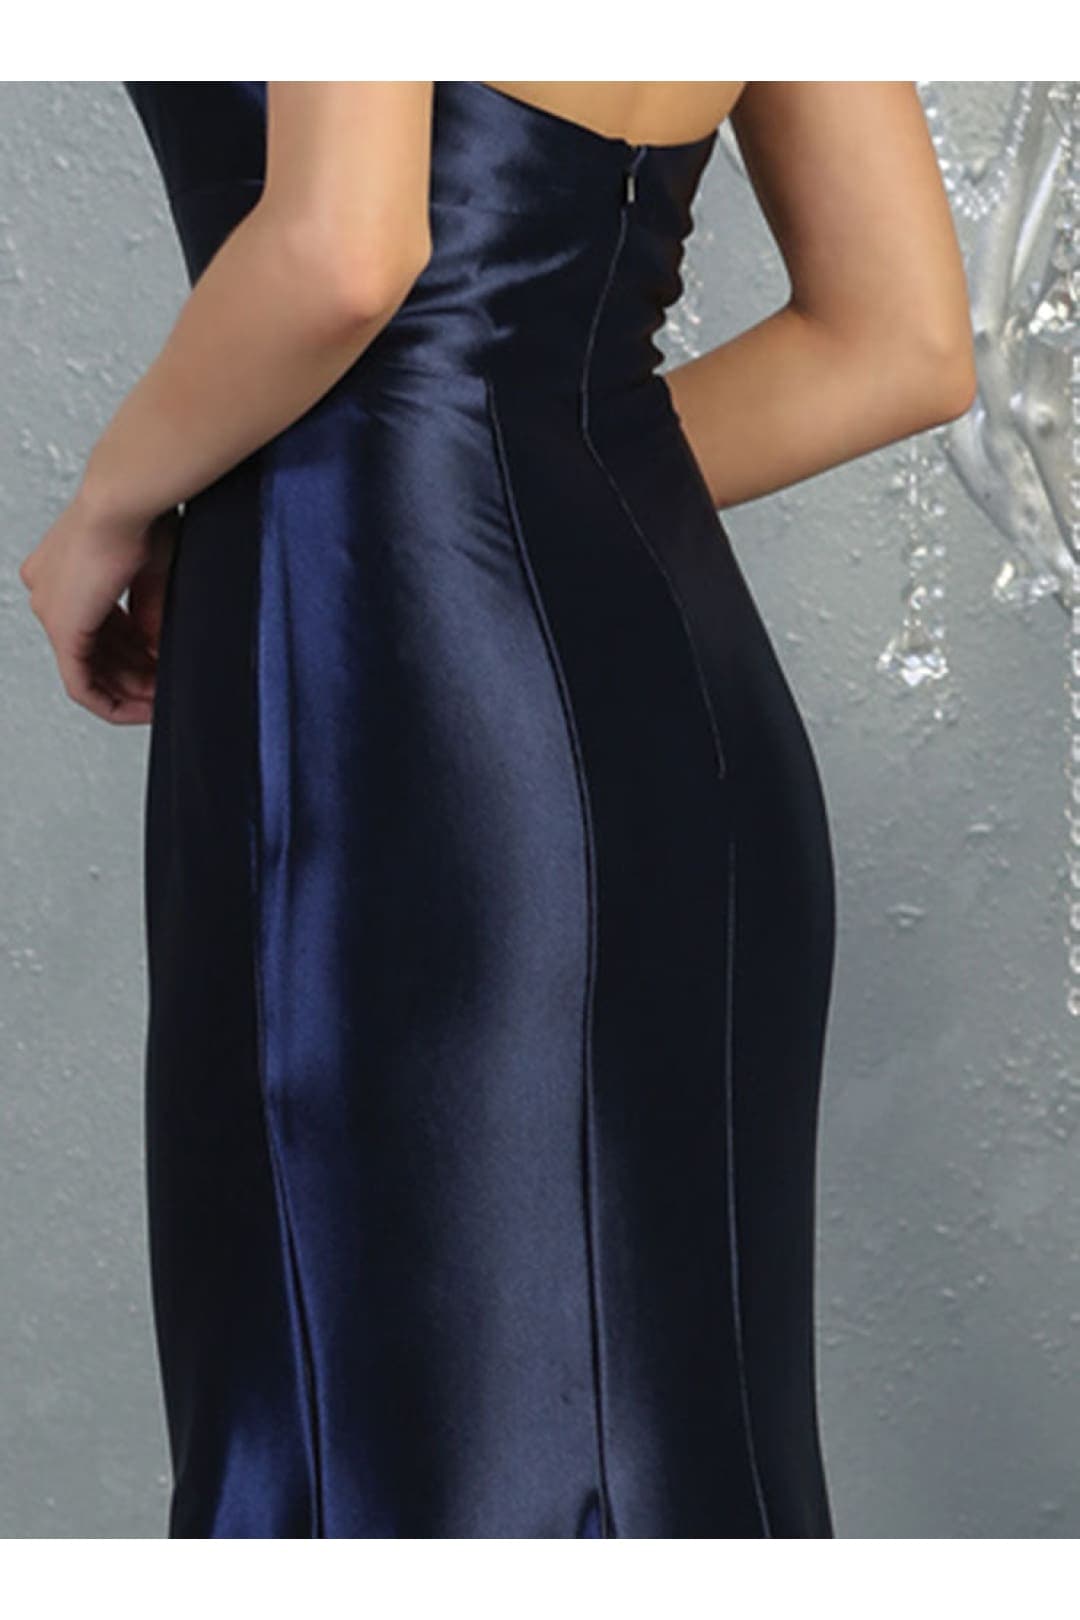 May Queen MQ1741 Halter V Neck With Slit Simple Shiny Evening Dress - NAVY BLUE / 4